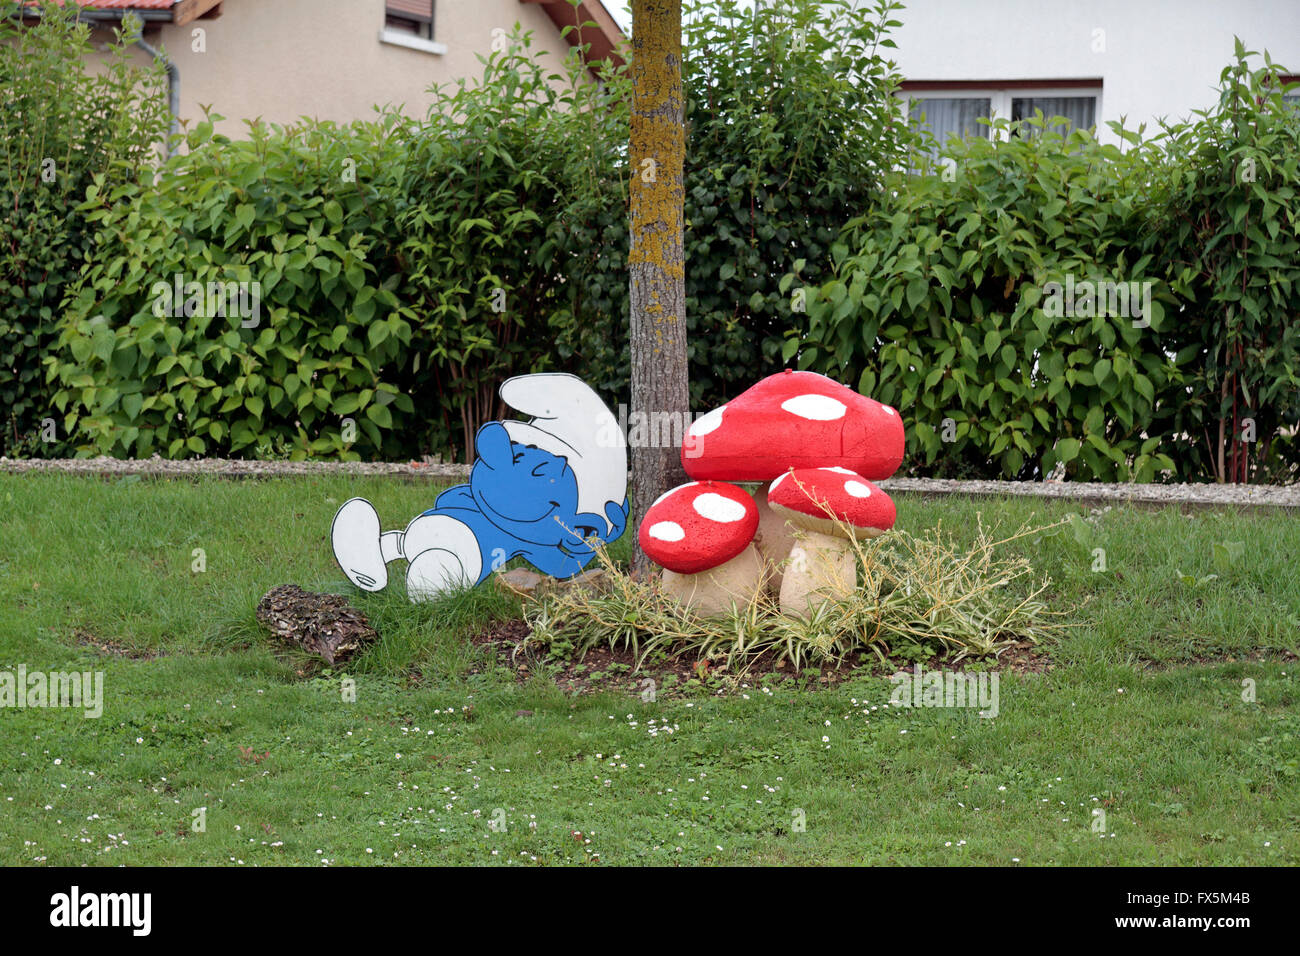 Comic character (Smurf and mushroom) inspired garden furniture in a small village near Verdun in France. Stock Photo